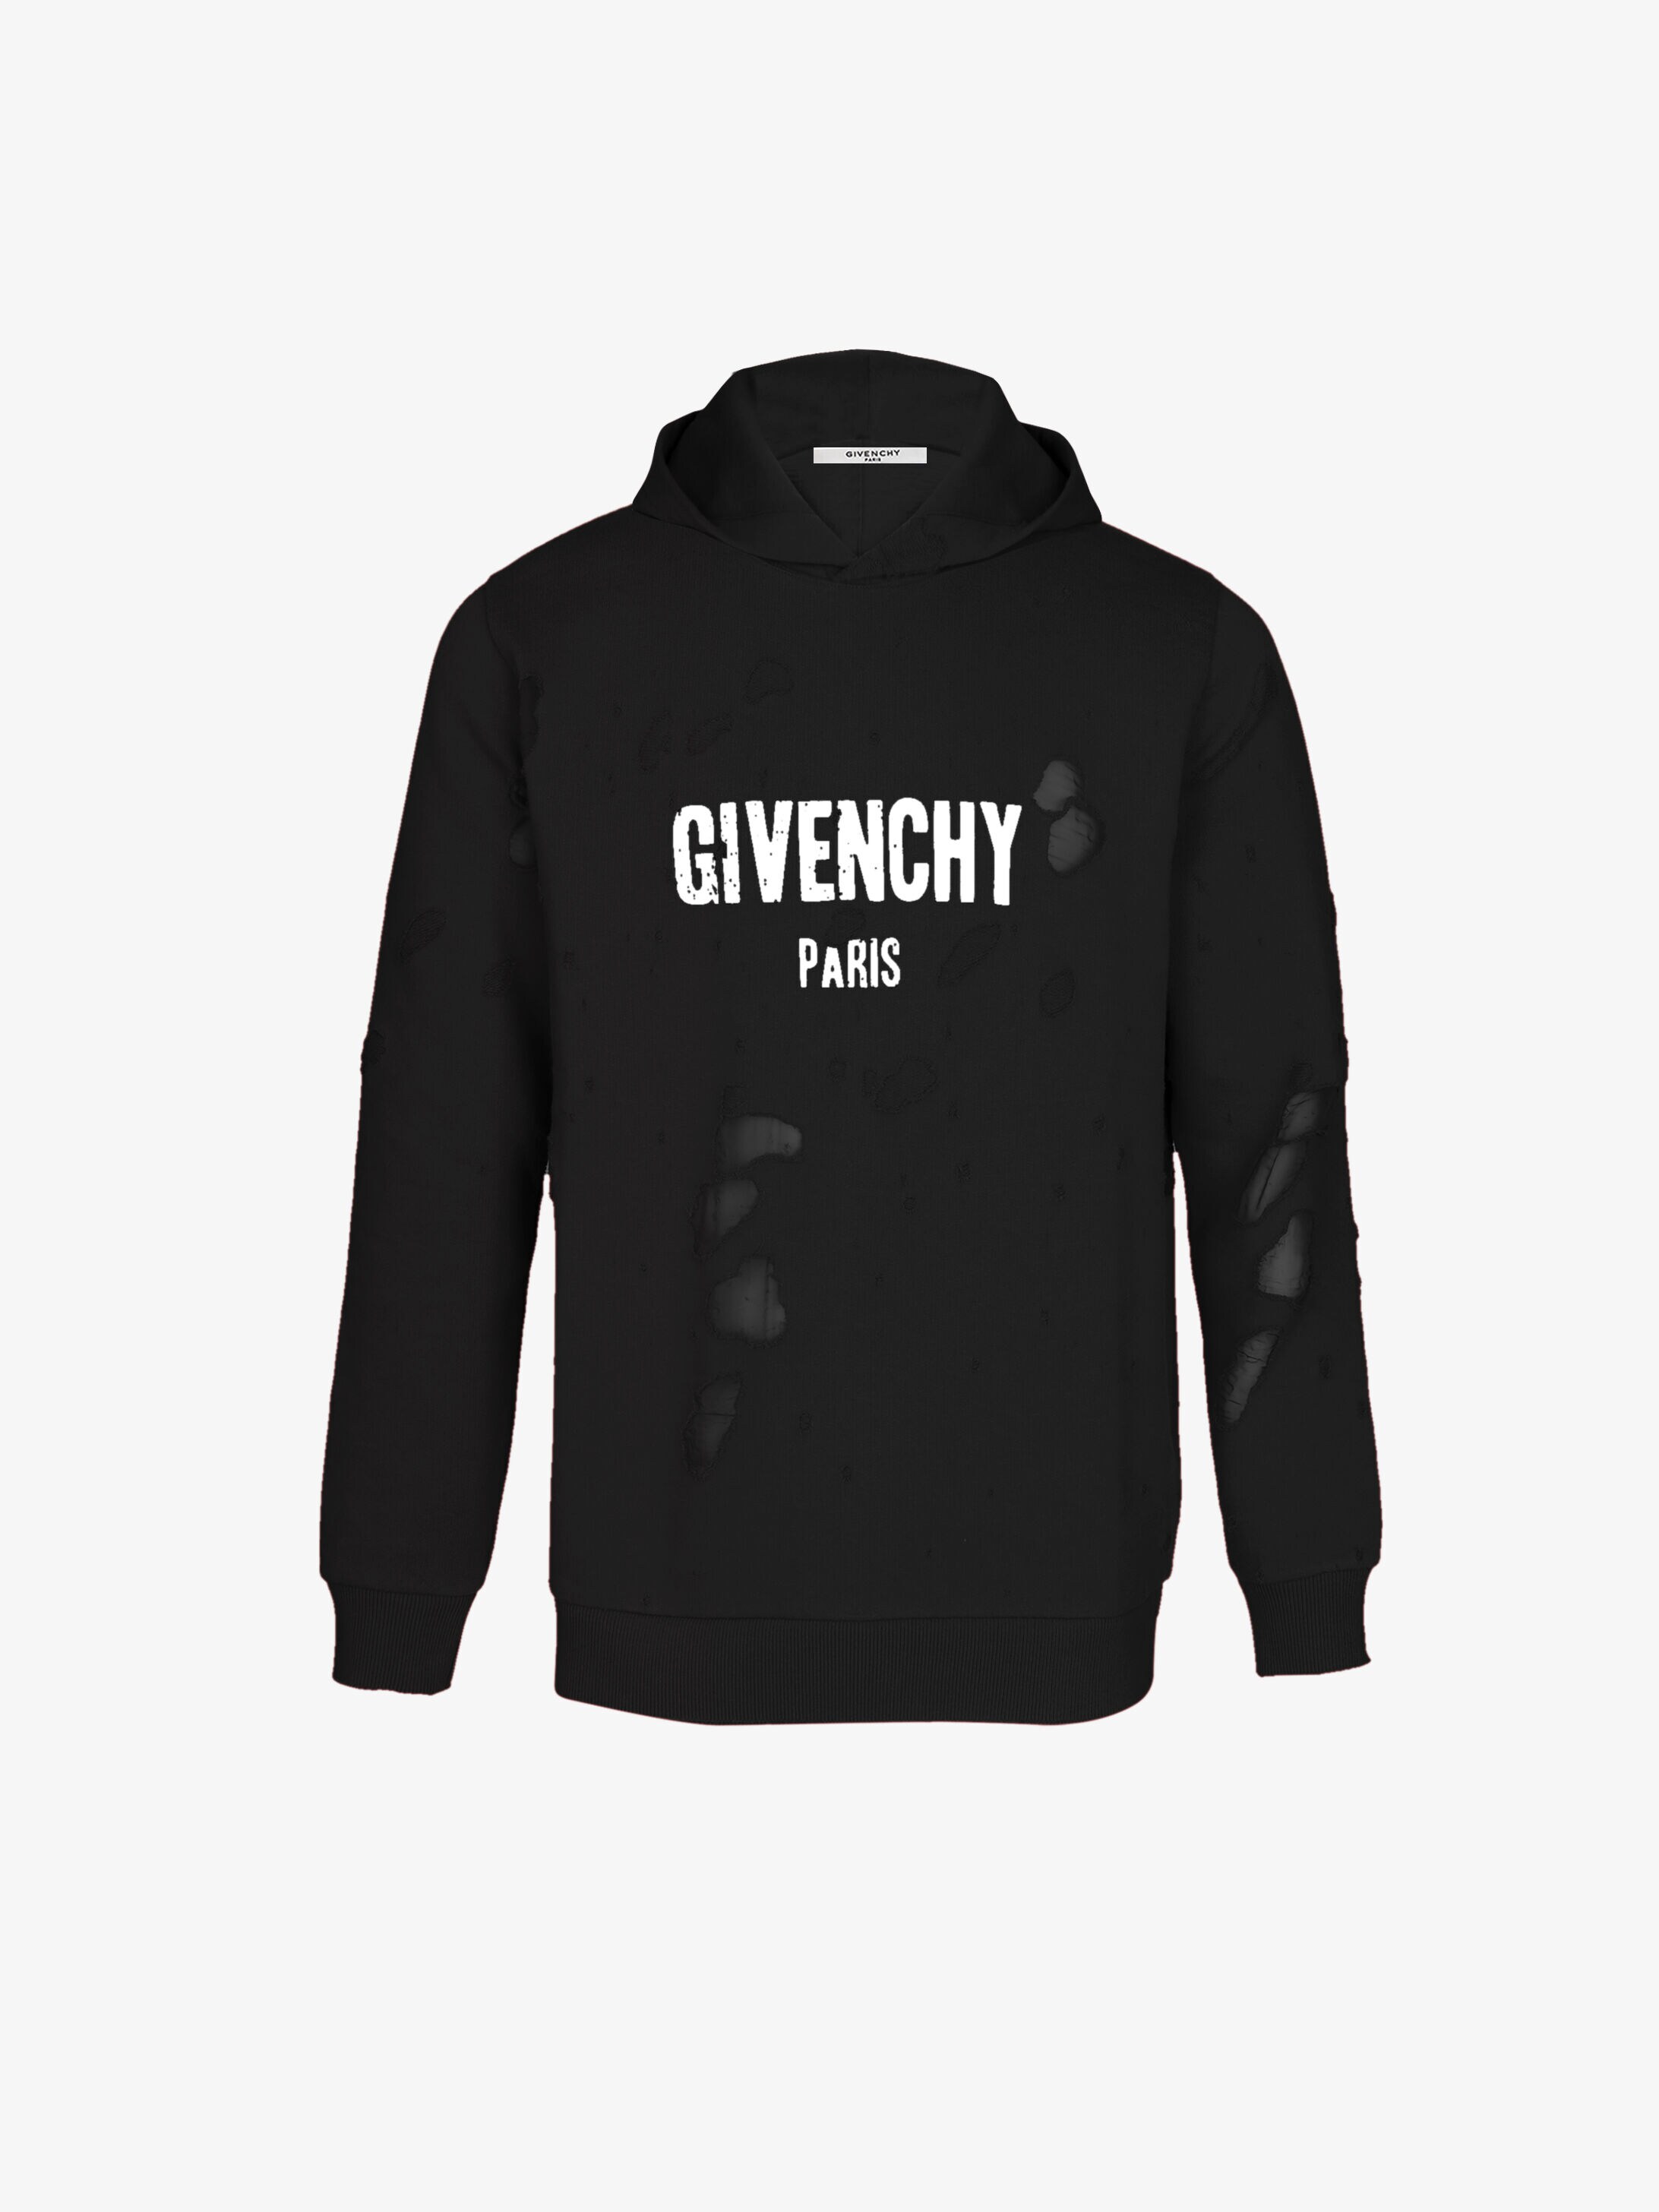 Givenchy PARIS destroyed hoodie 